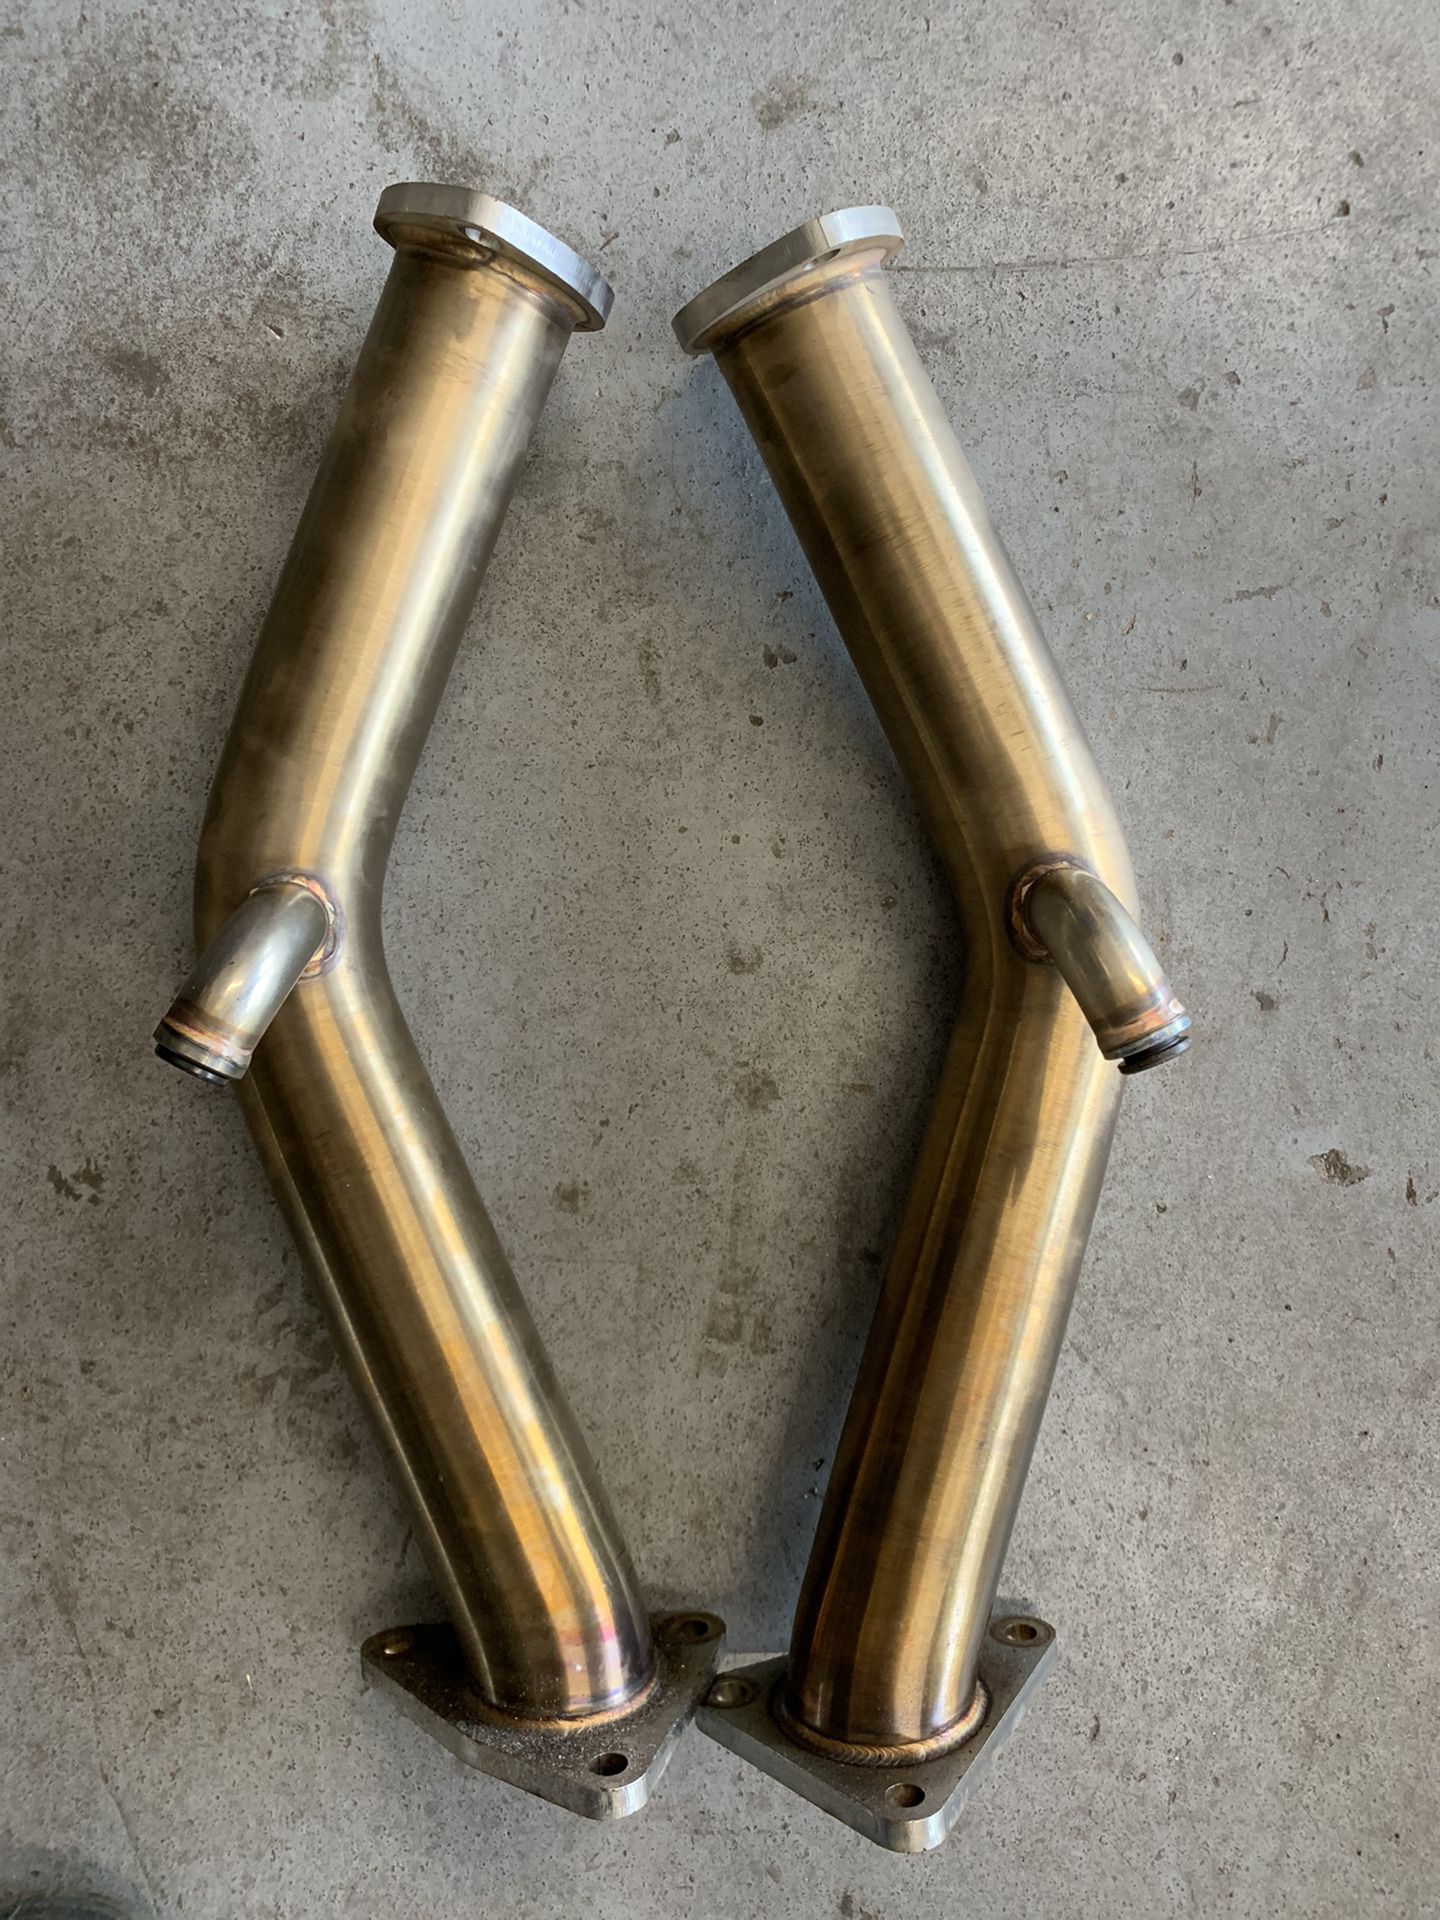 Nissan 370Z ISR Test pipes